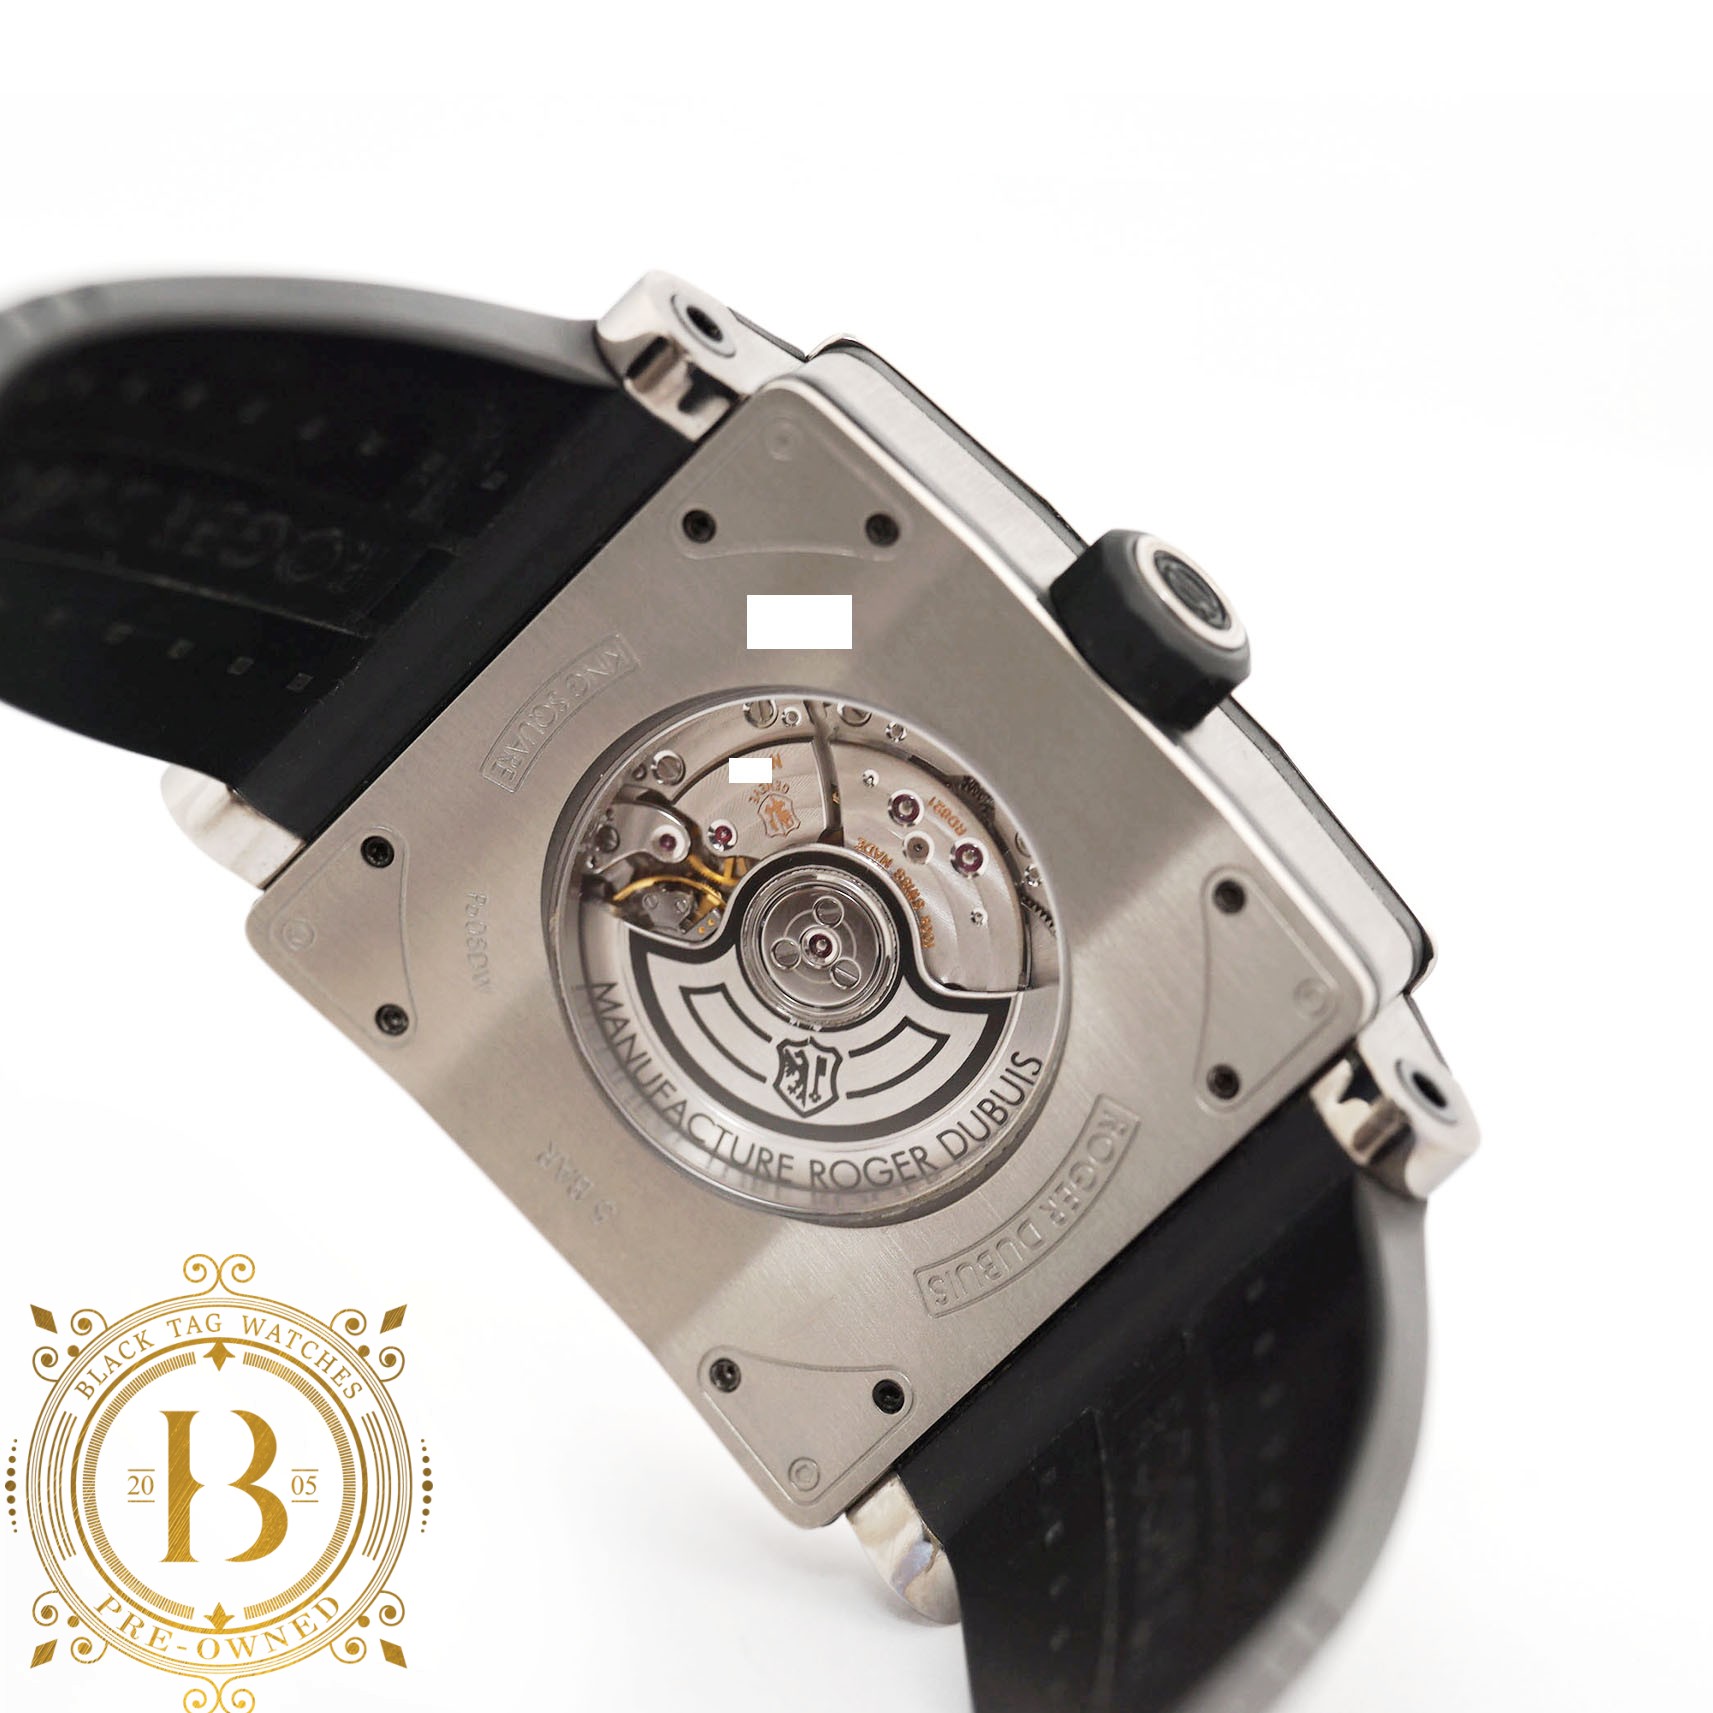 Roger Dubuis King Square Titanium Watch KS40-821-71-00/03R01/A for $12,000  • Black Tag Watches Pre-Owned